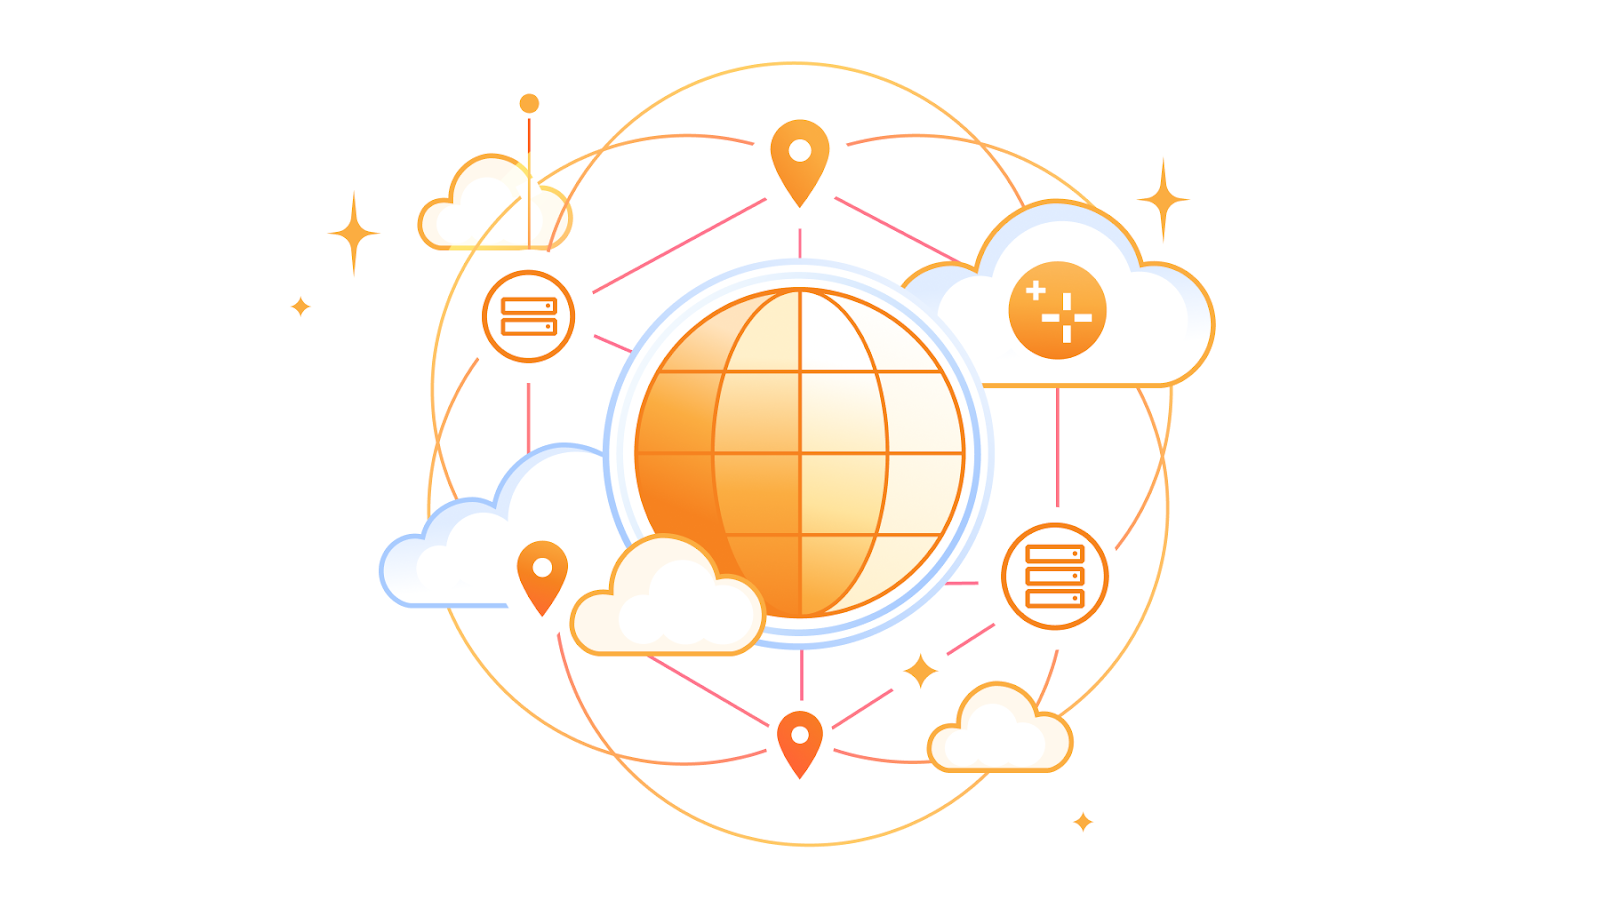 Cloudflare treats SASE anxiety for VeloCloud customers